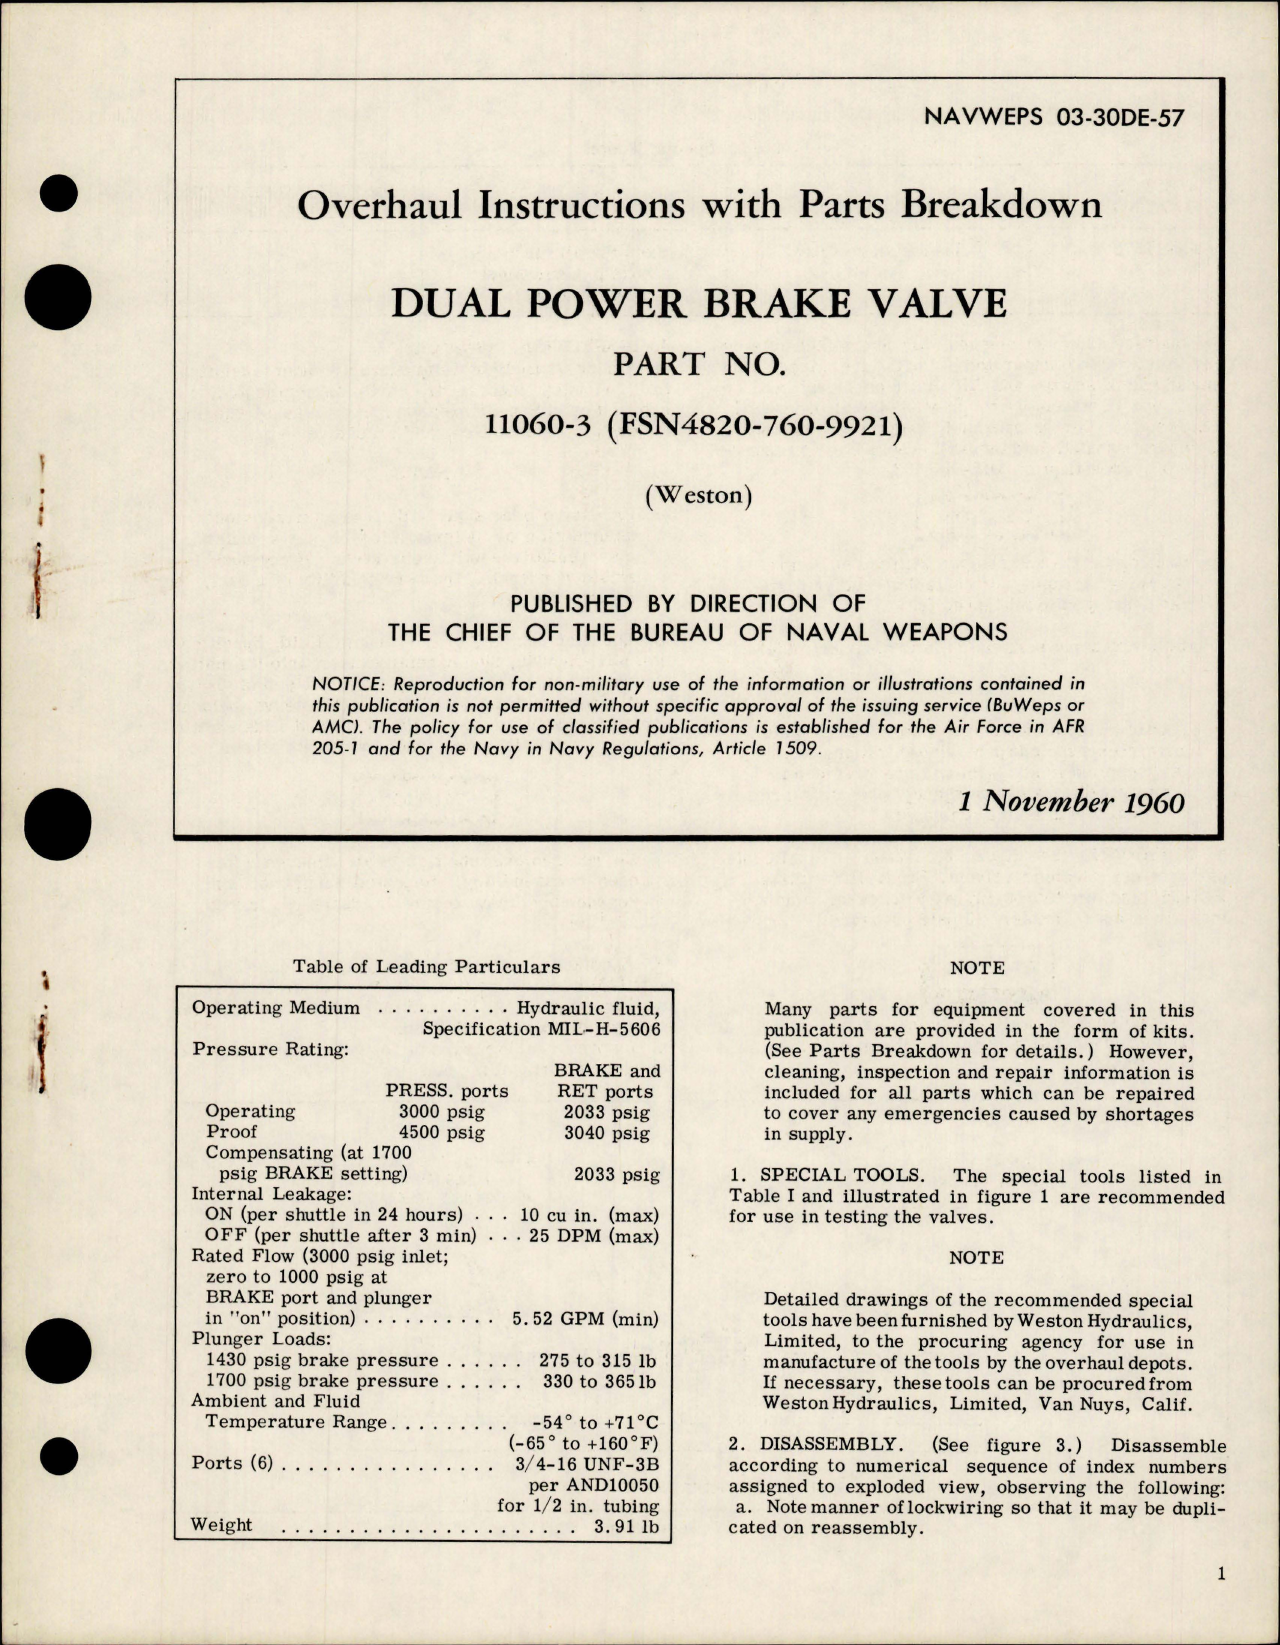 Sample page 1 from AirCorps Library document: Overhaul Instructions with Parts for Dual Power Brake Valve - Part 11060-3 